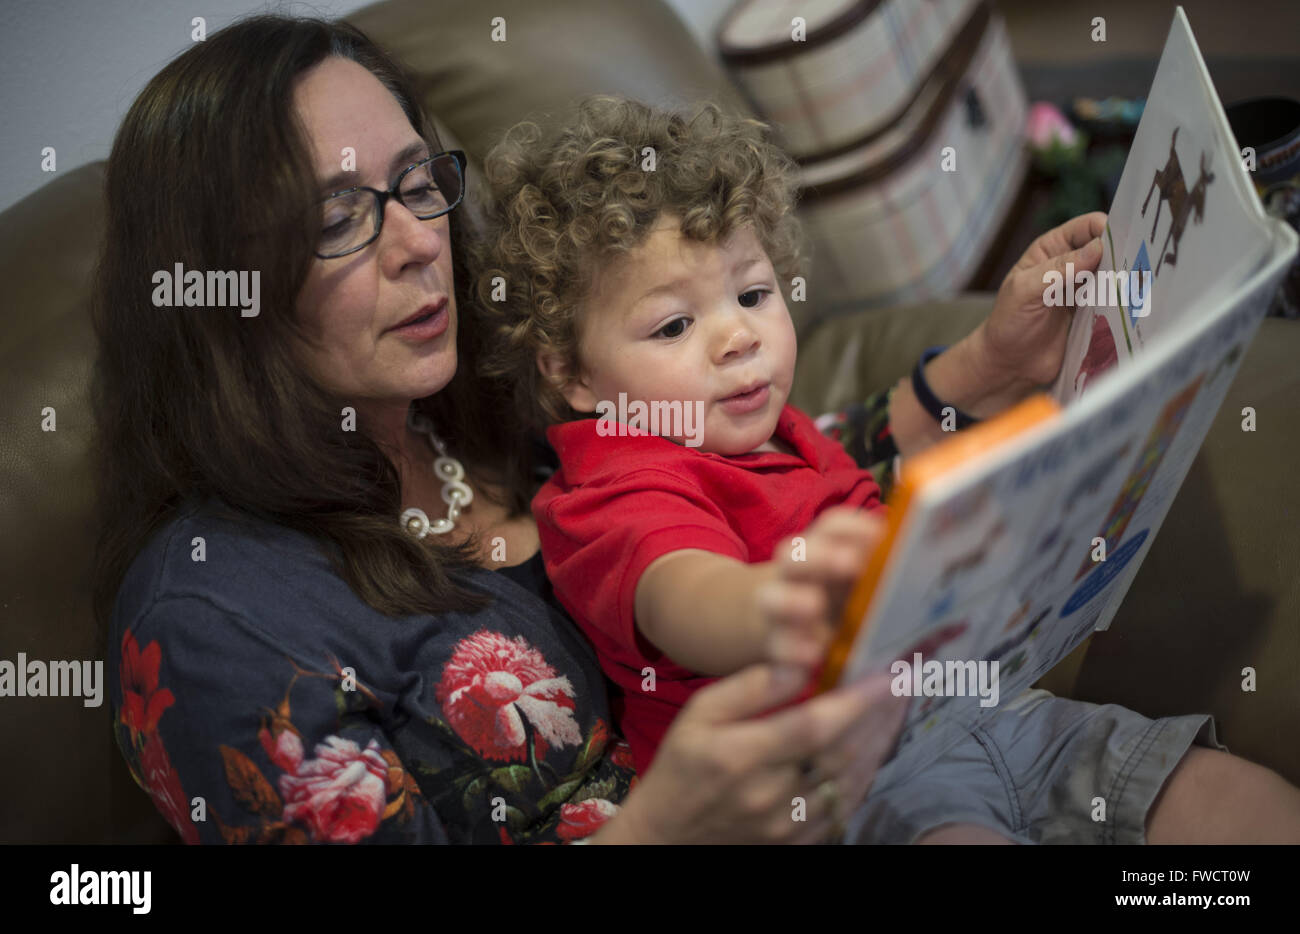 La Habra, California, USA. 3rd Apr, 2016. CAROLE CHAMBERS, of Placentia, California, reads to her grandson, BRAXTON CHAMBERS, 20 months old, during a break in the activities of a birthday party for Braxton's four-year-old cousin. © Bruce Chambers/ZUMA Wire/Alamy Live News Stock Photo